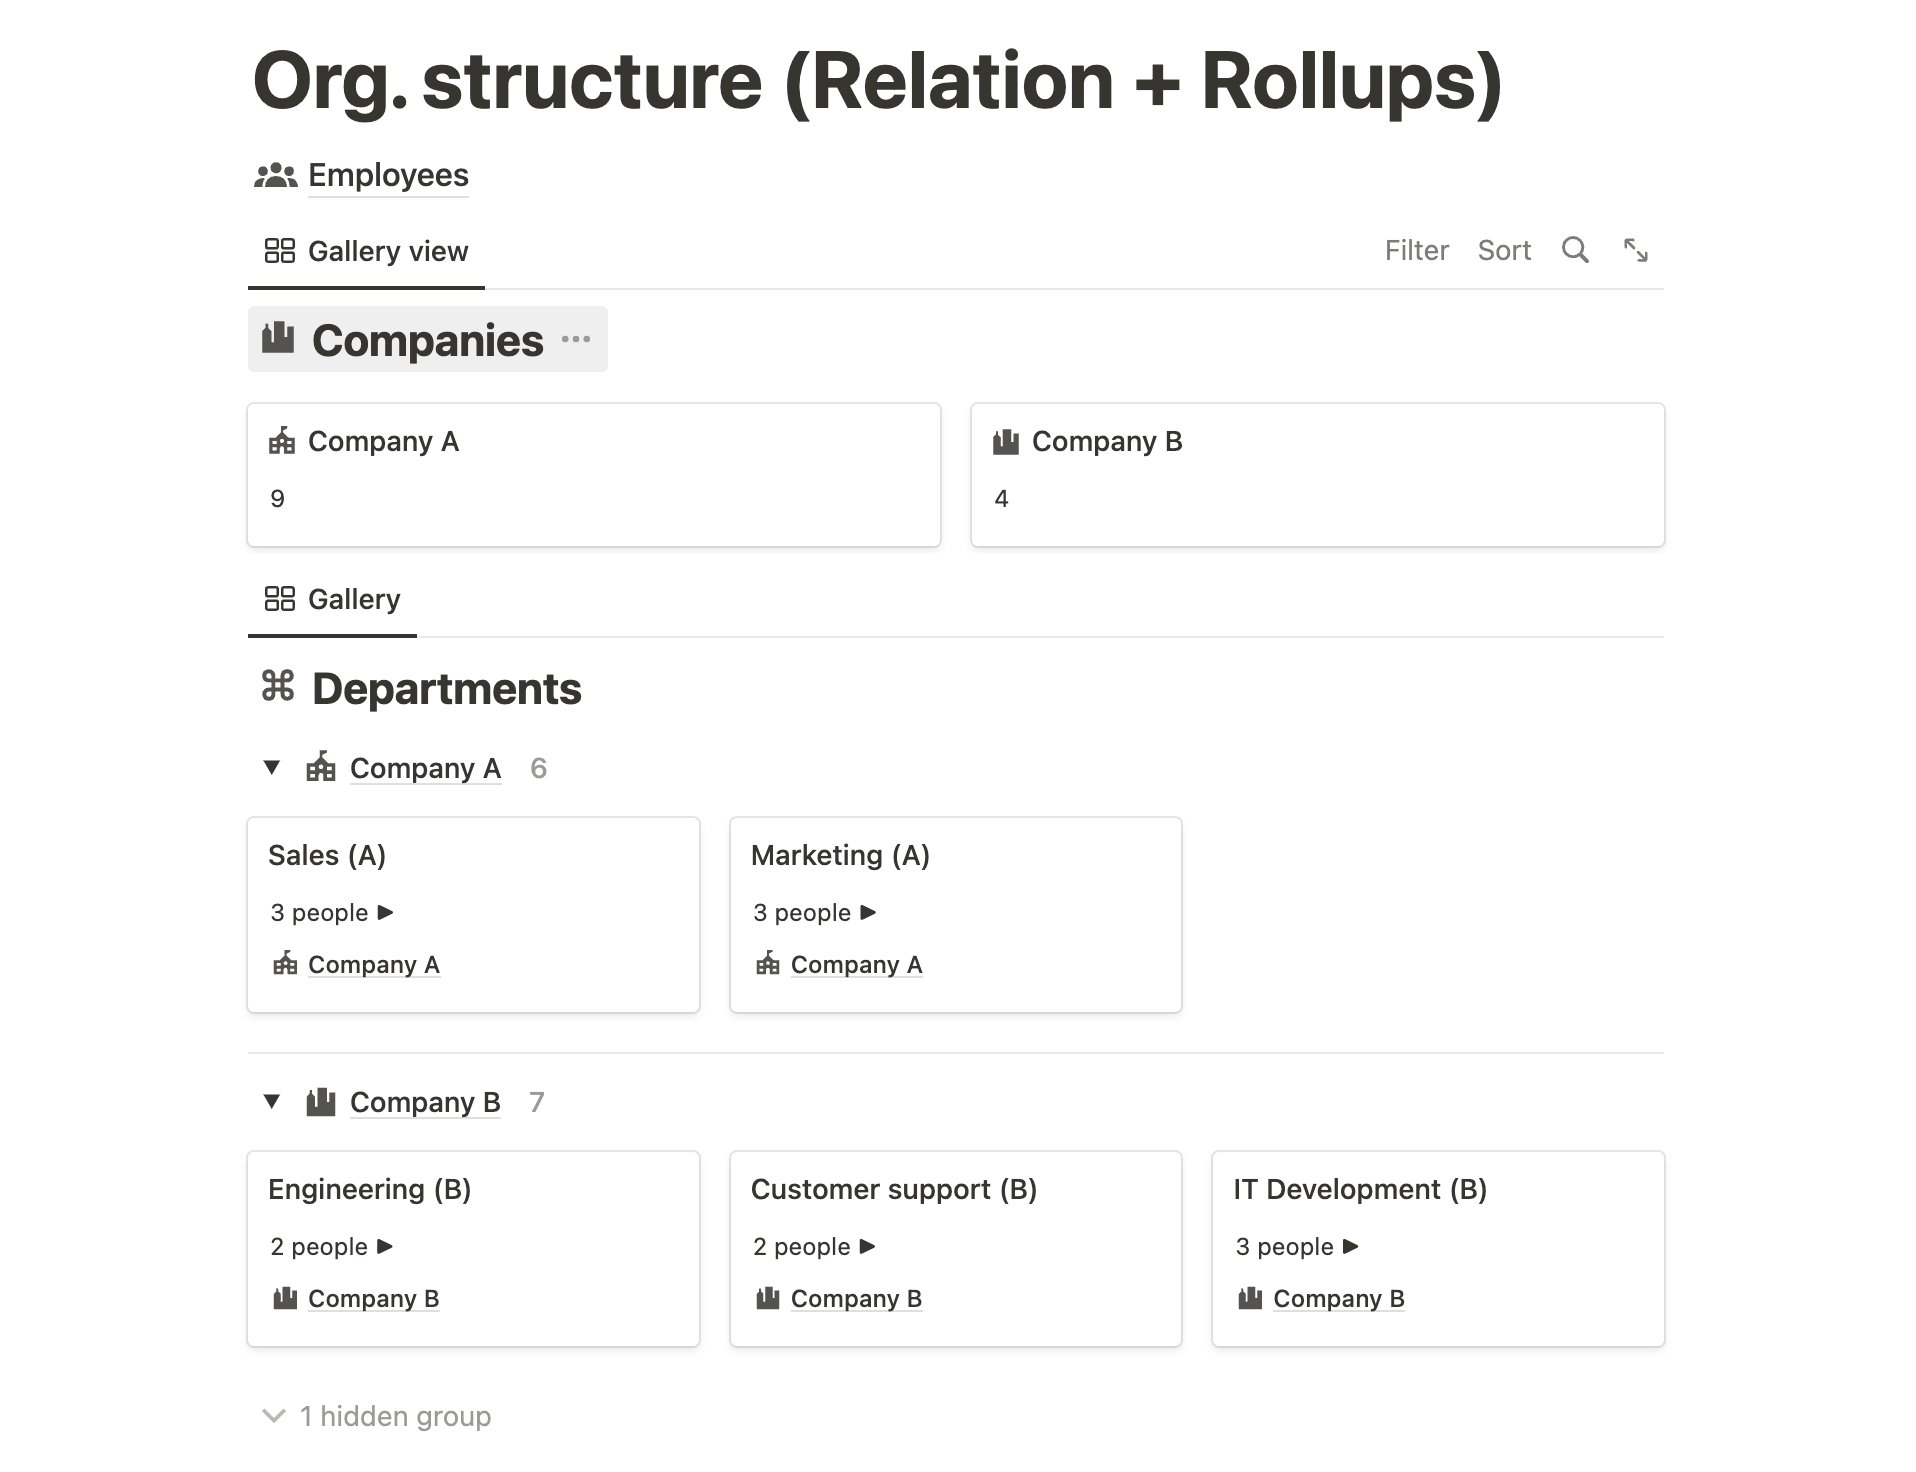 Org structure for group companies